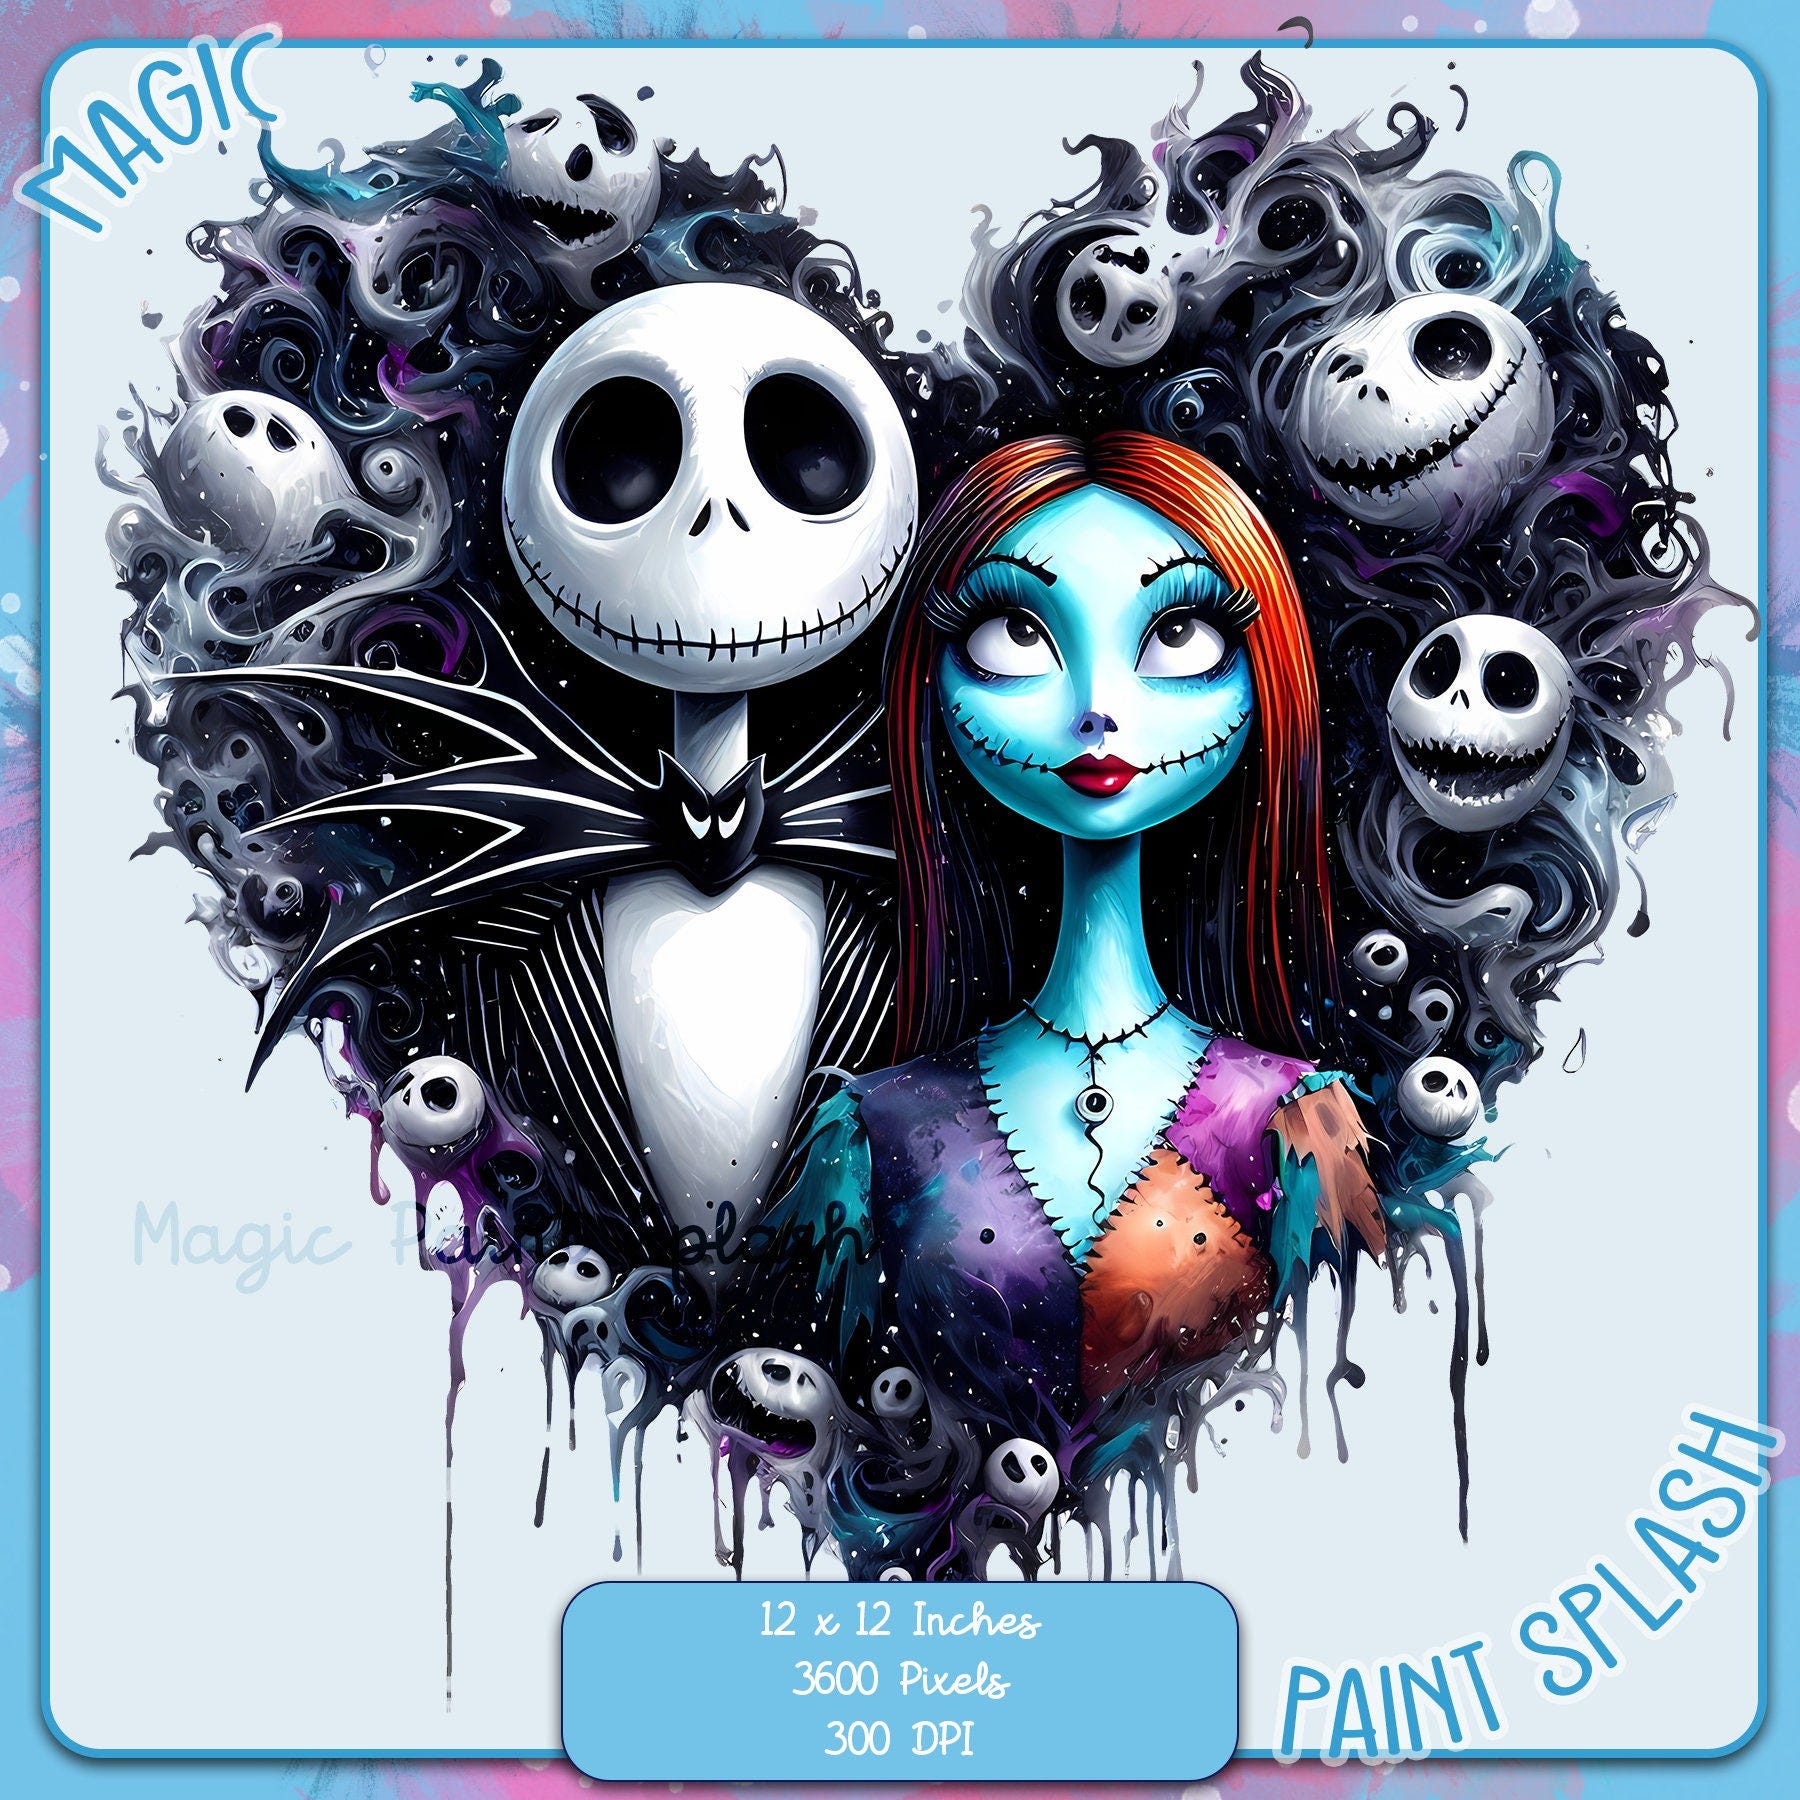 Jack and Sally Watercolor Splash, Clipart Images, Graphics and Artwork, Rainbow Aesthetic, PNG Christmas Nightmare Images